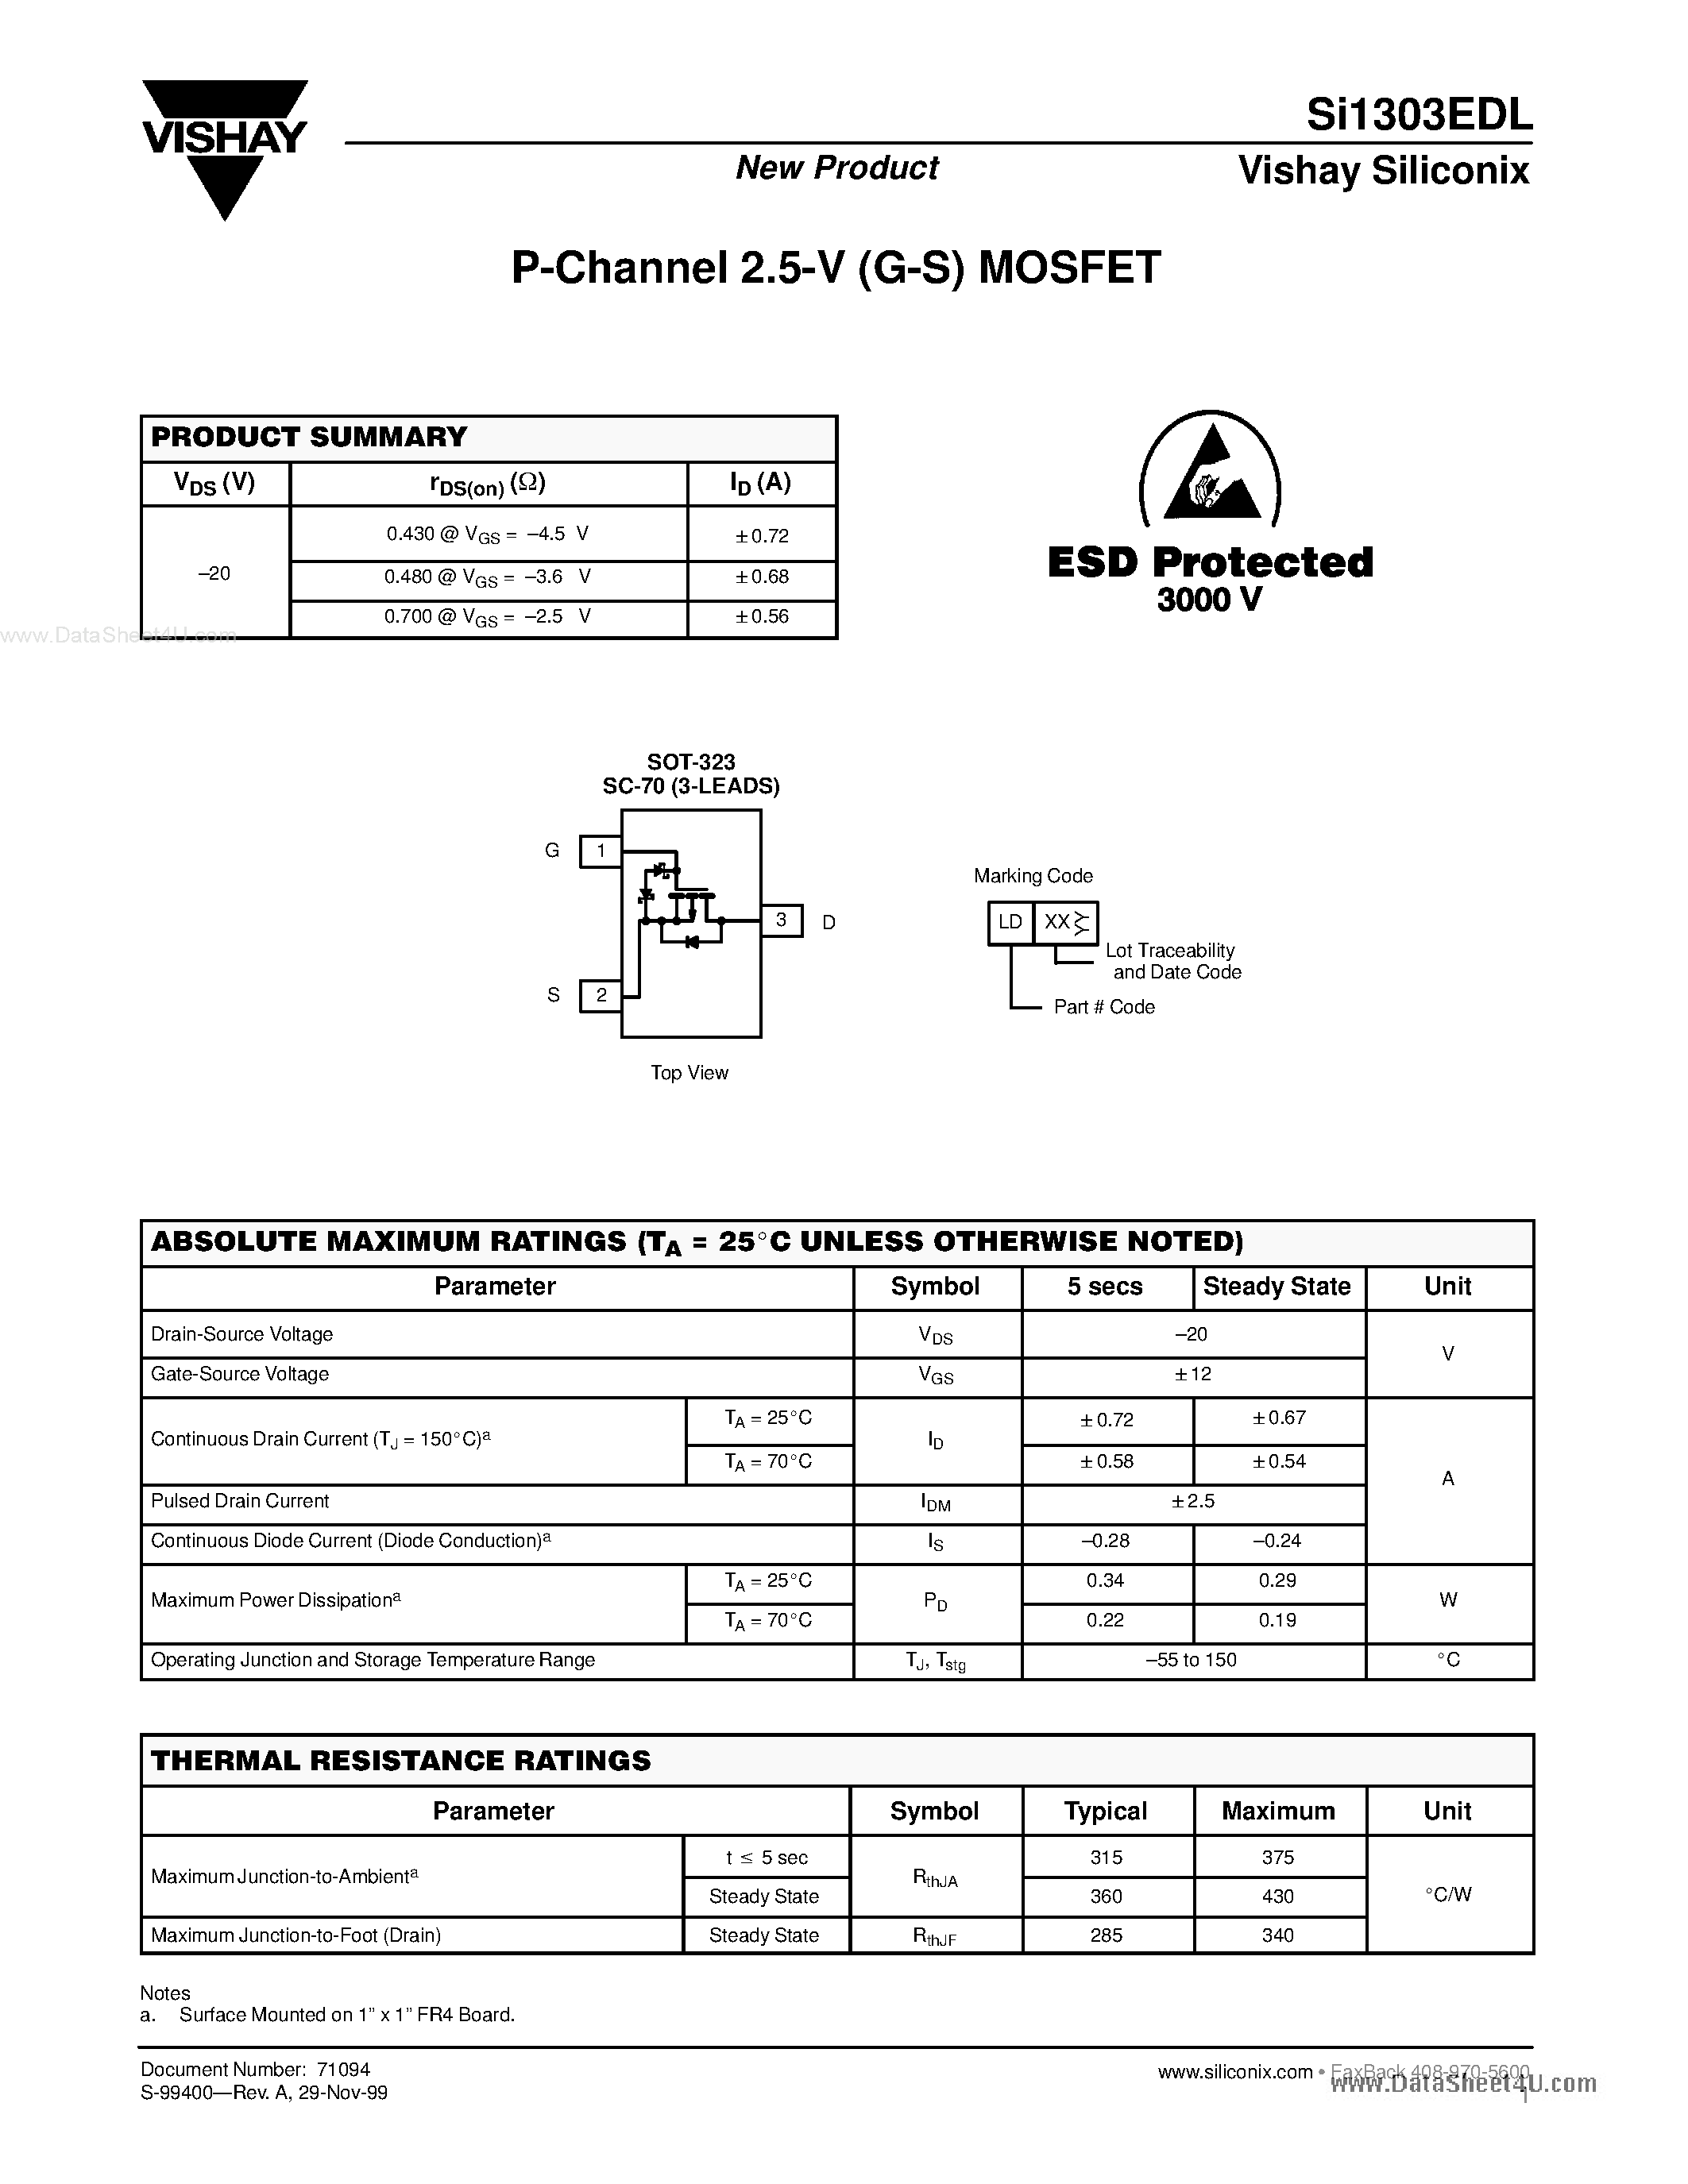 Datasheet SI1303EDL - P-Channel 2.5-V (G-S) MOSFET page 1